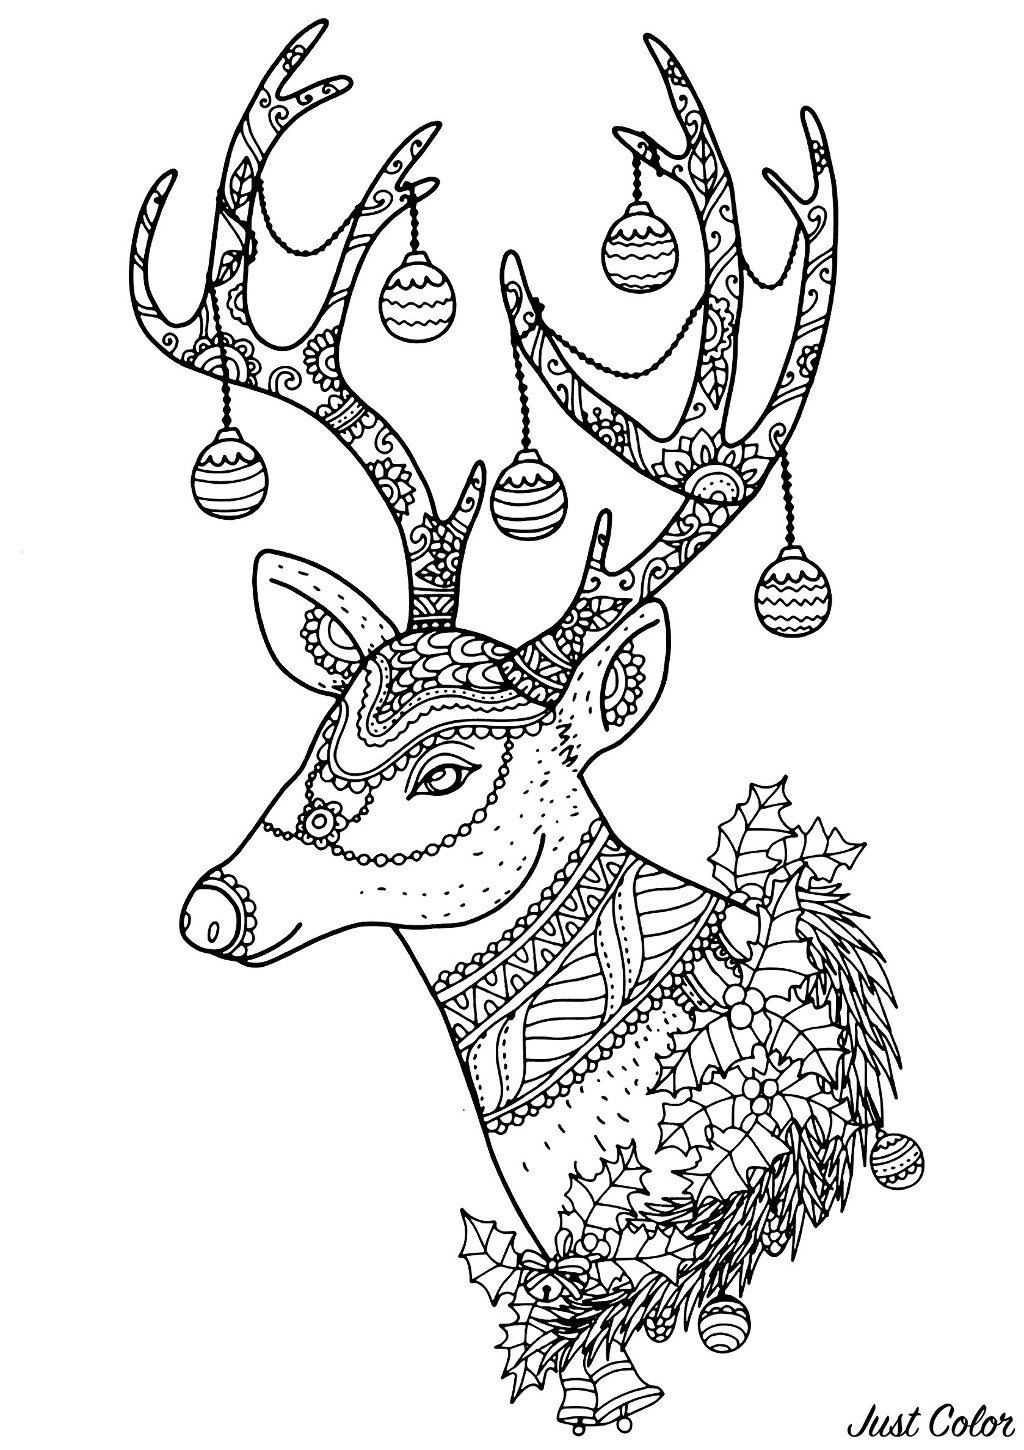 Download Christmas reindeer nontachai hengtragool - Christmas Adult Coloring Pages